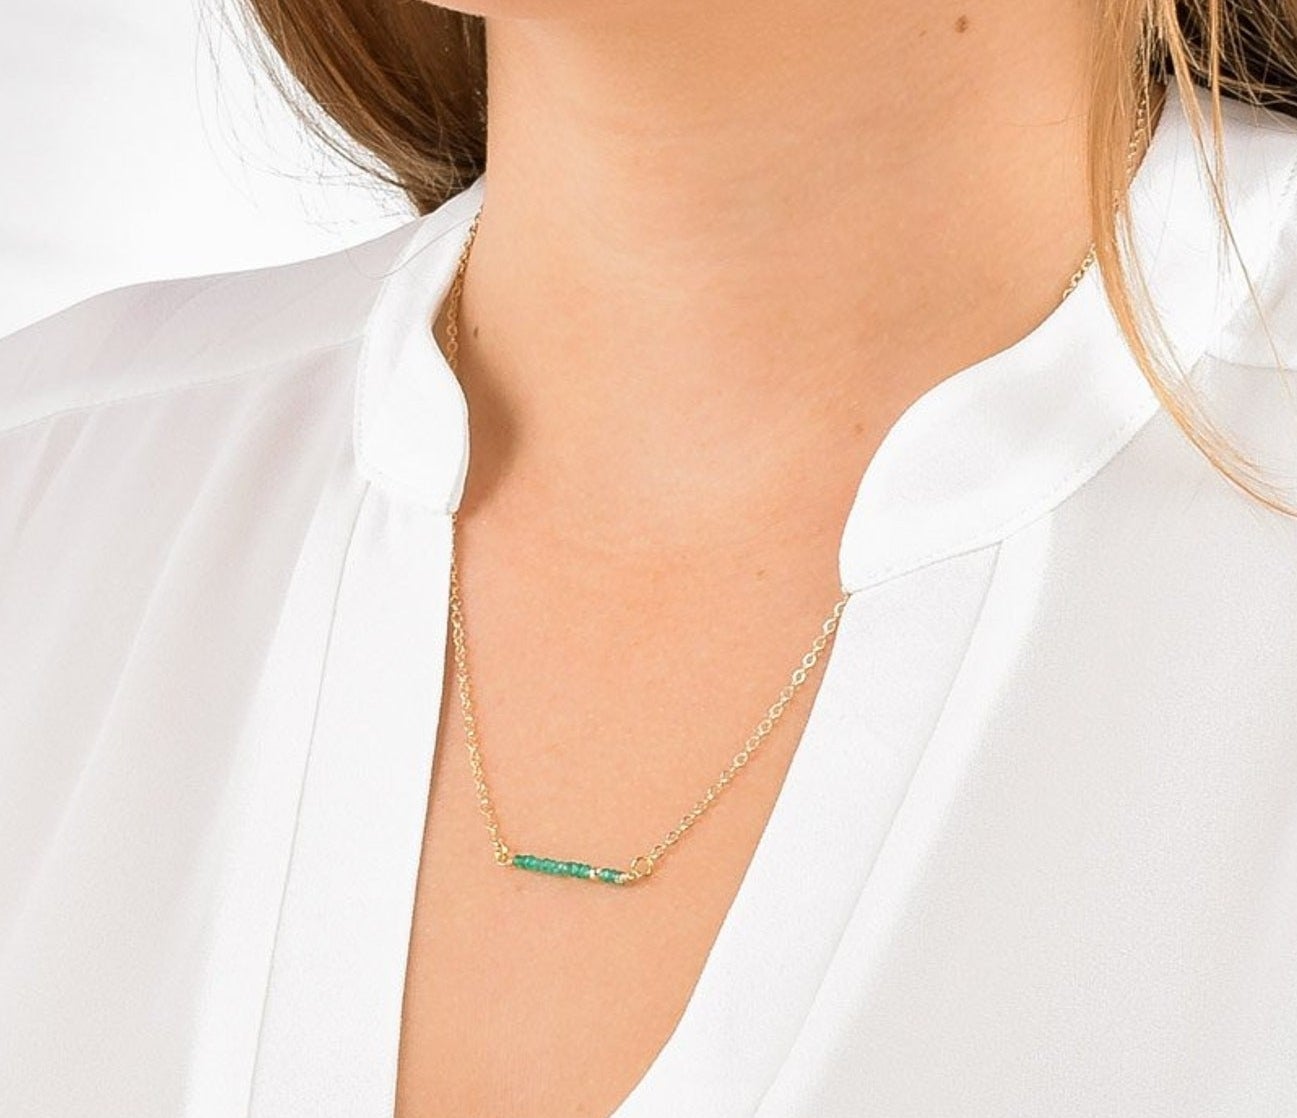 A person wearing a golden chain necklace with a bar of green onyx gemstone beads.